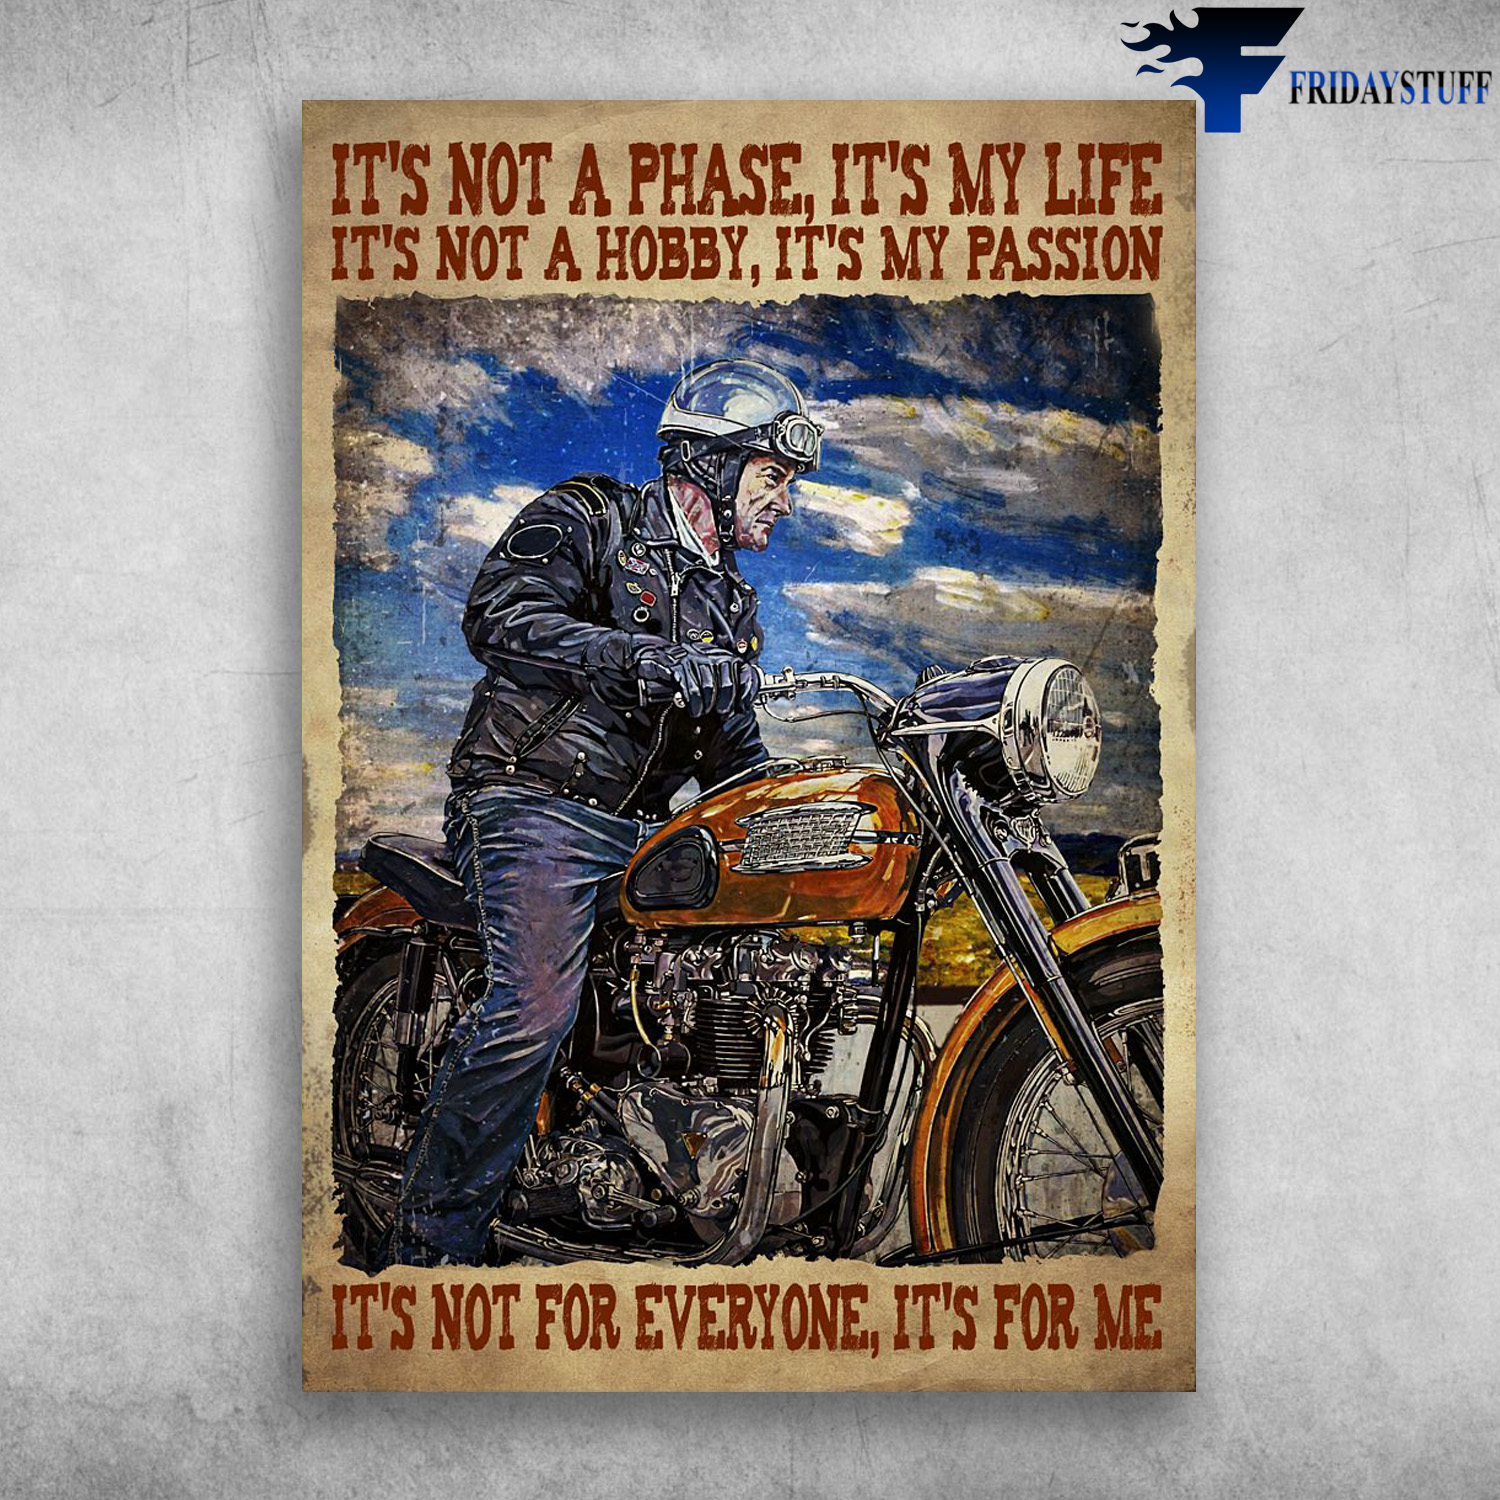 Old Man Riding, Motorcycle Man - It's Not A Phase, It's My Life, It's Not A Hobby, It's My Passion, It's Not For Everyone, It's For Me